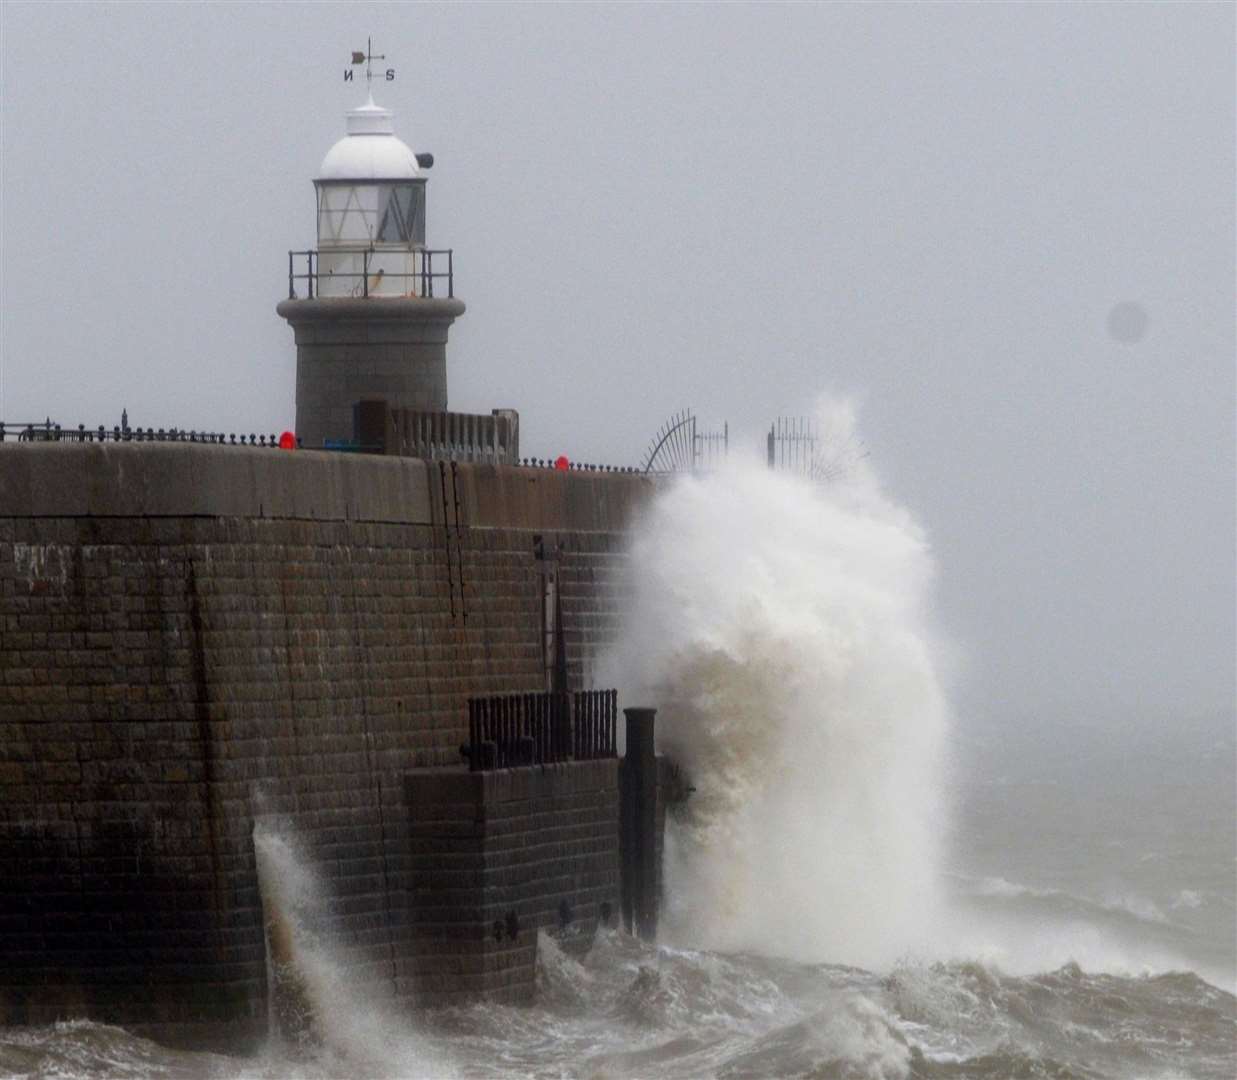 Strong winds and large waves at the harbour FolkestonePicture: Wayne McCabe FM3845301 (7061514)